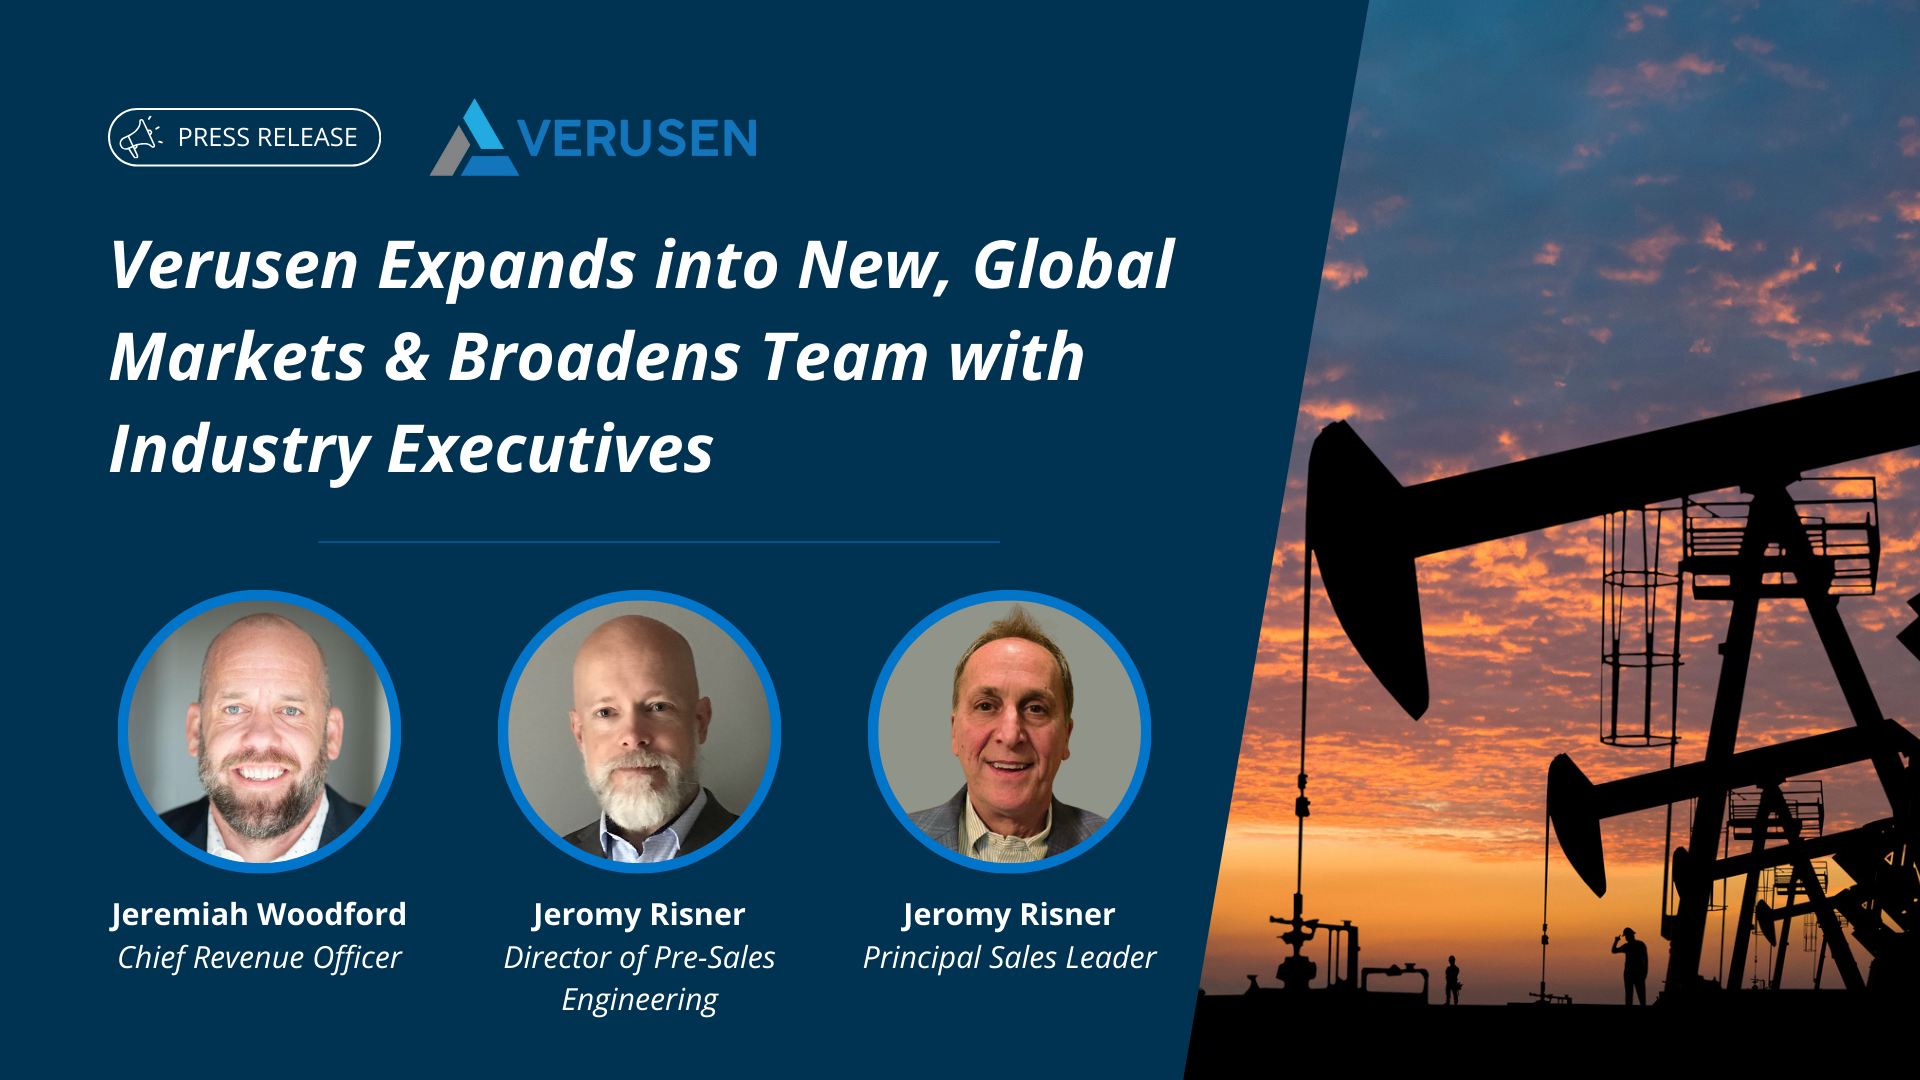 Verusen expands into new markets and appoints new executives.